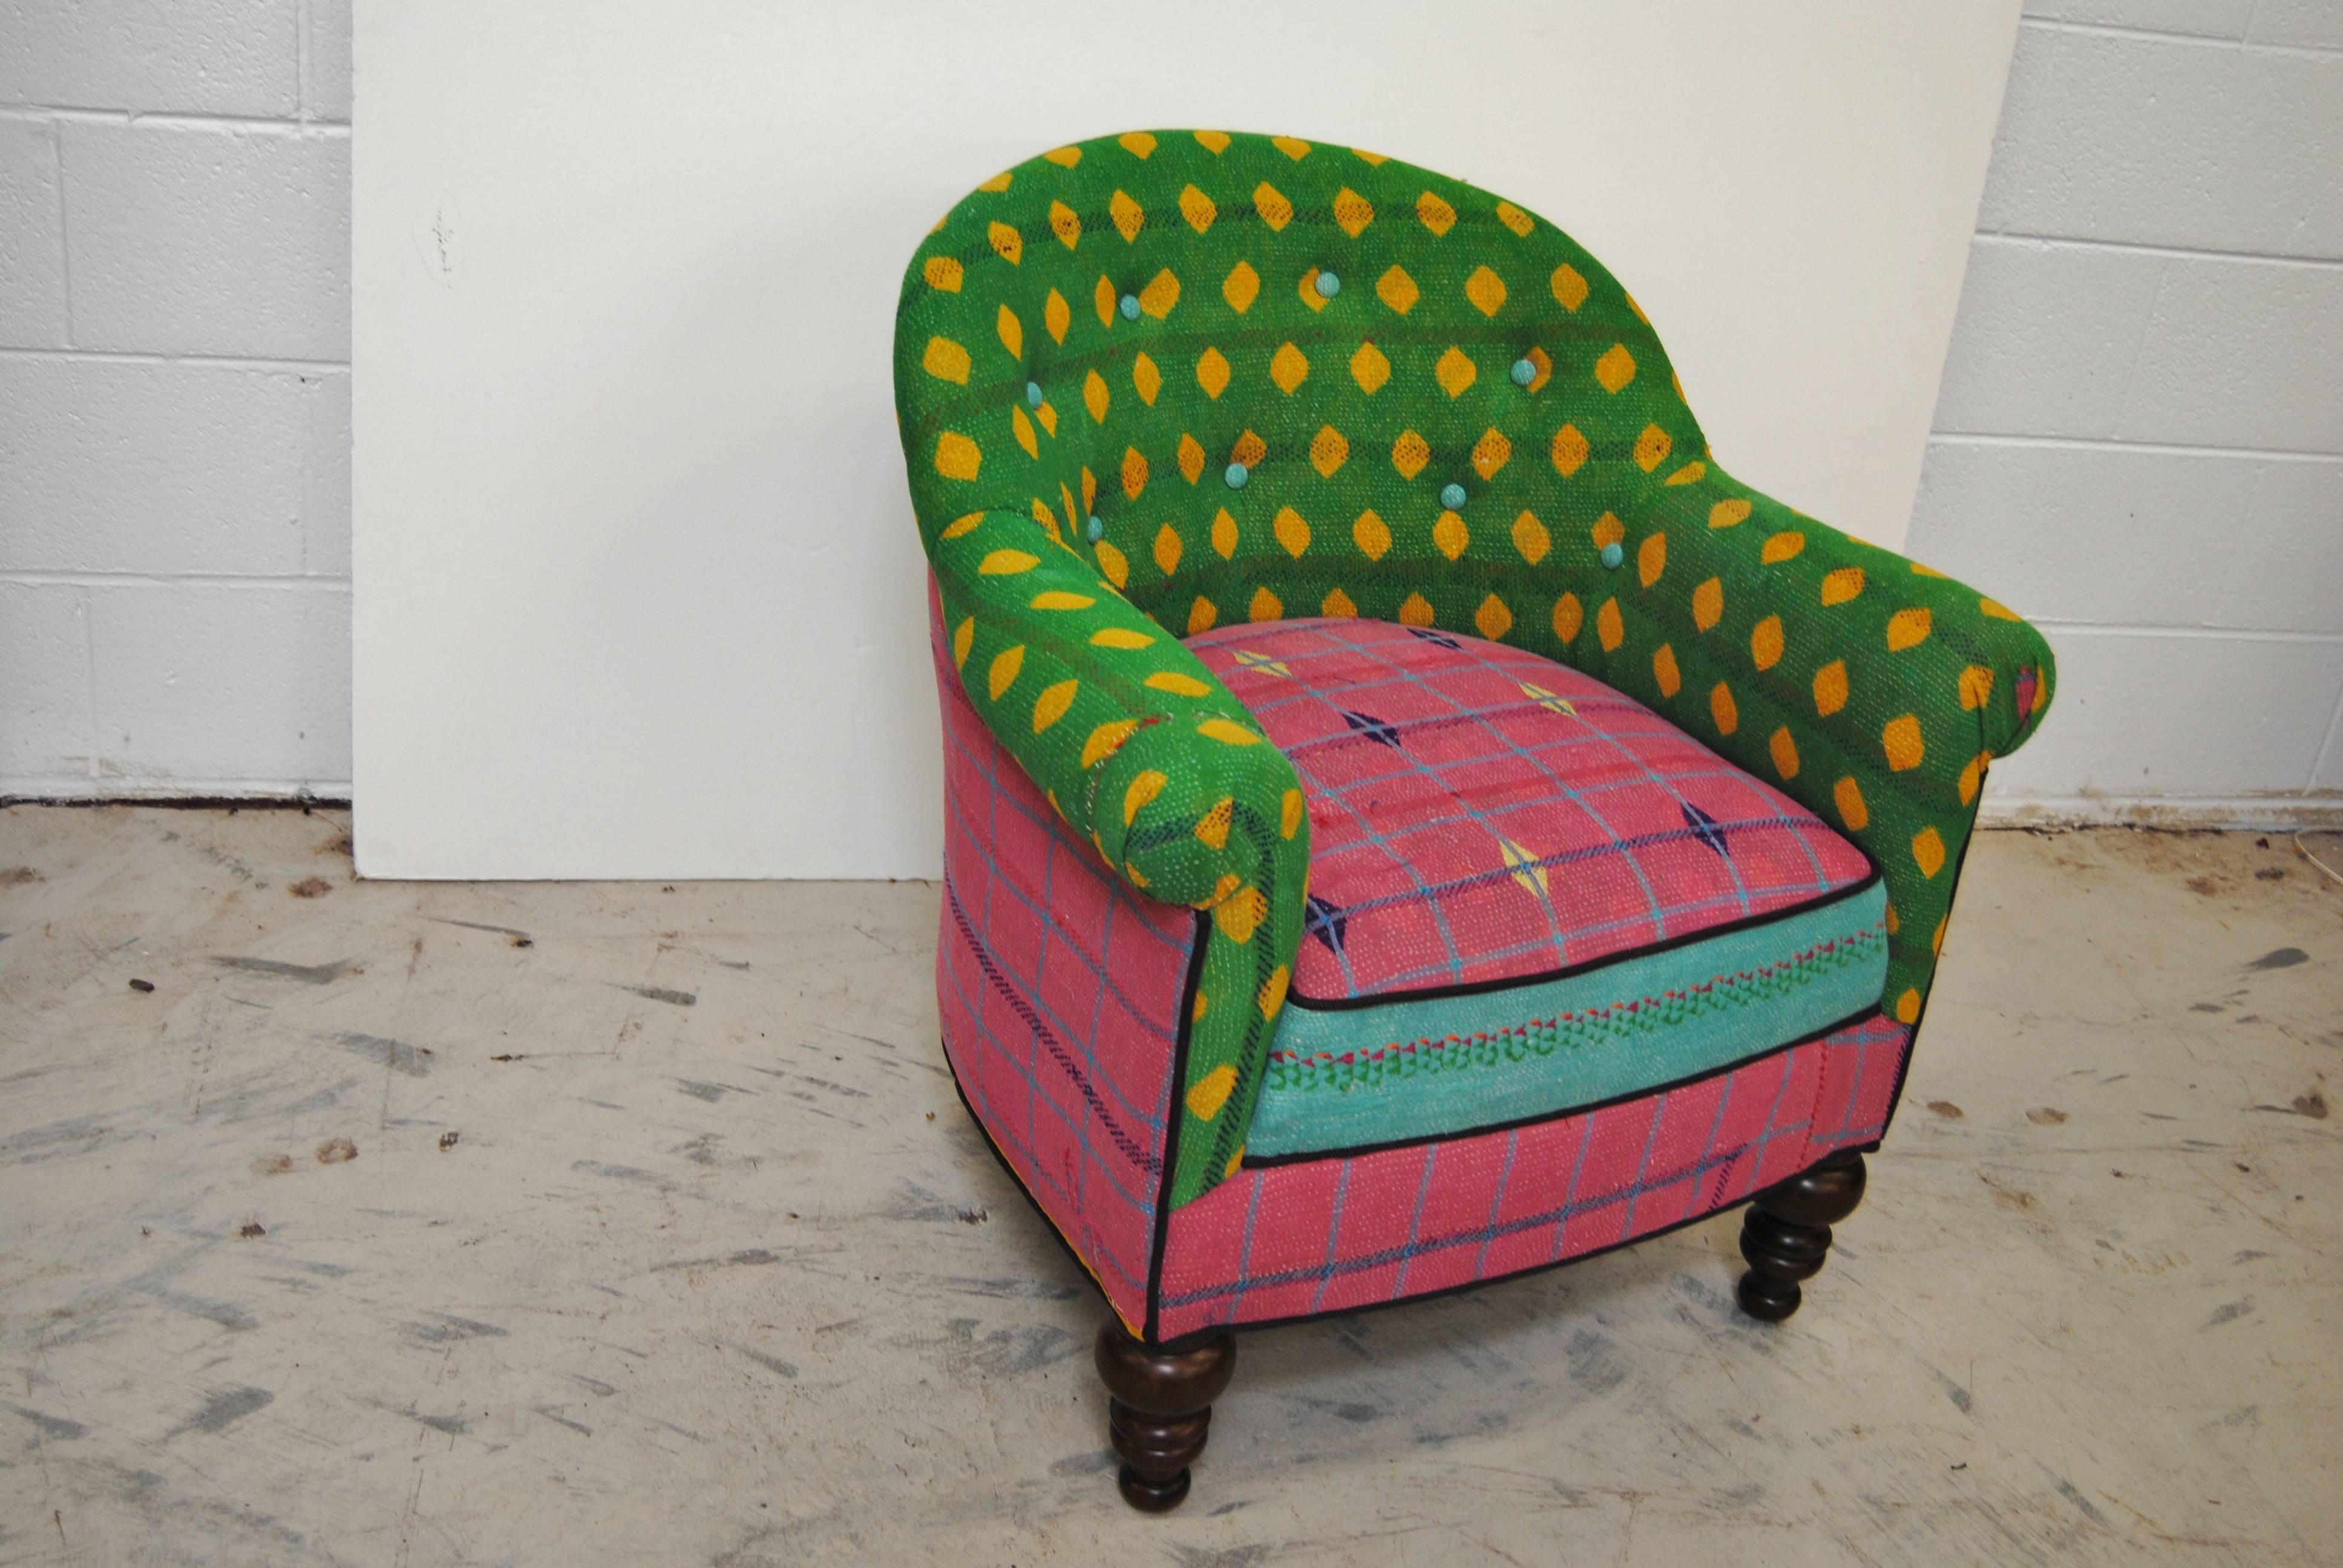 Vintage French small scale club chair newly upholstered in an assortment of vintage kantha quilts from India. Four to five layers of vibrant colored vintage cotton saris are pieced and hand quilted with tiny stitches. The chair has been restored and